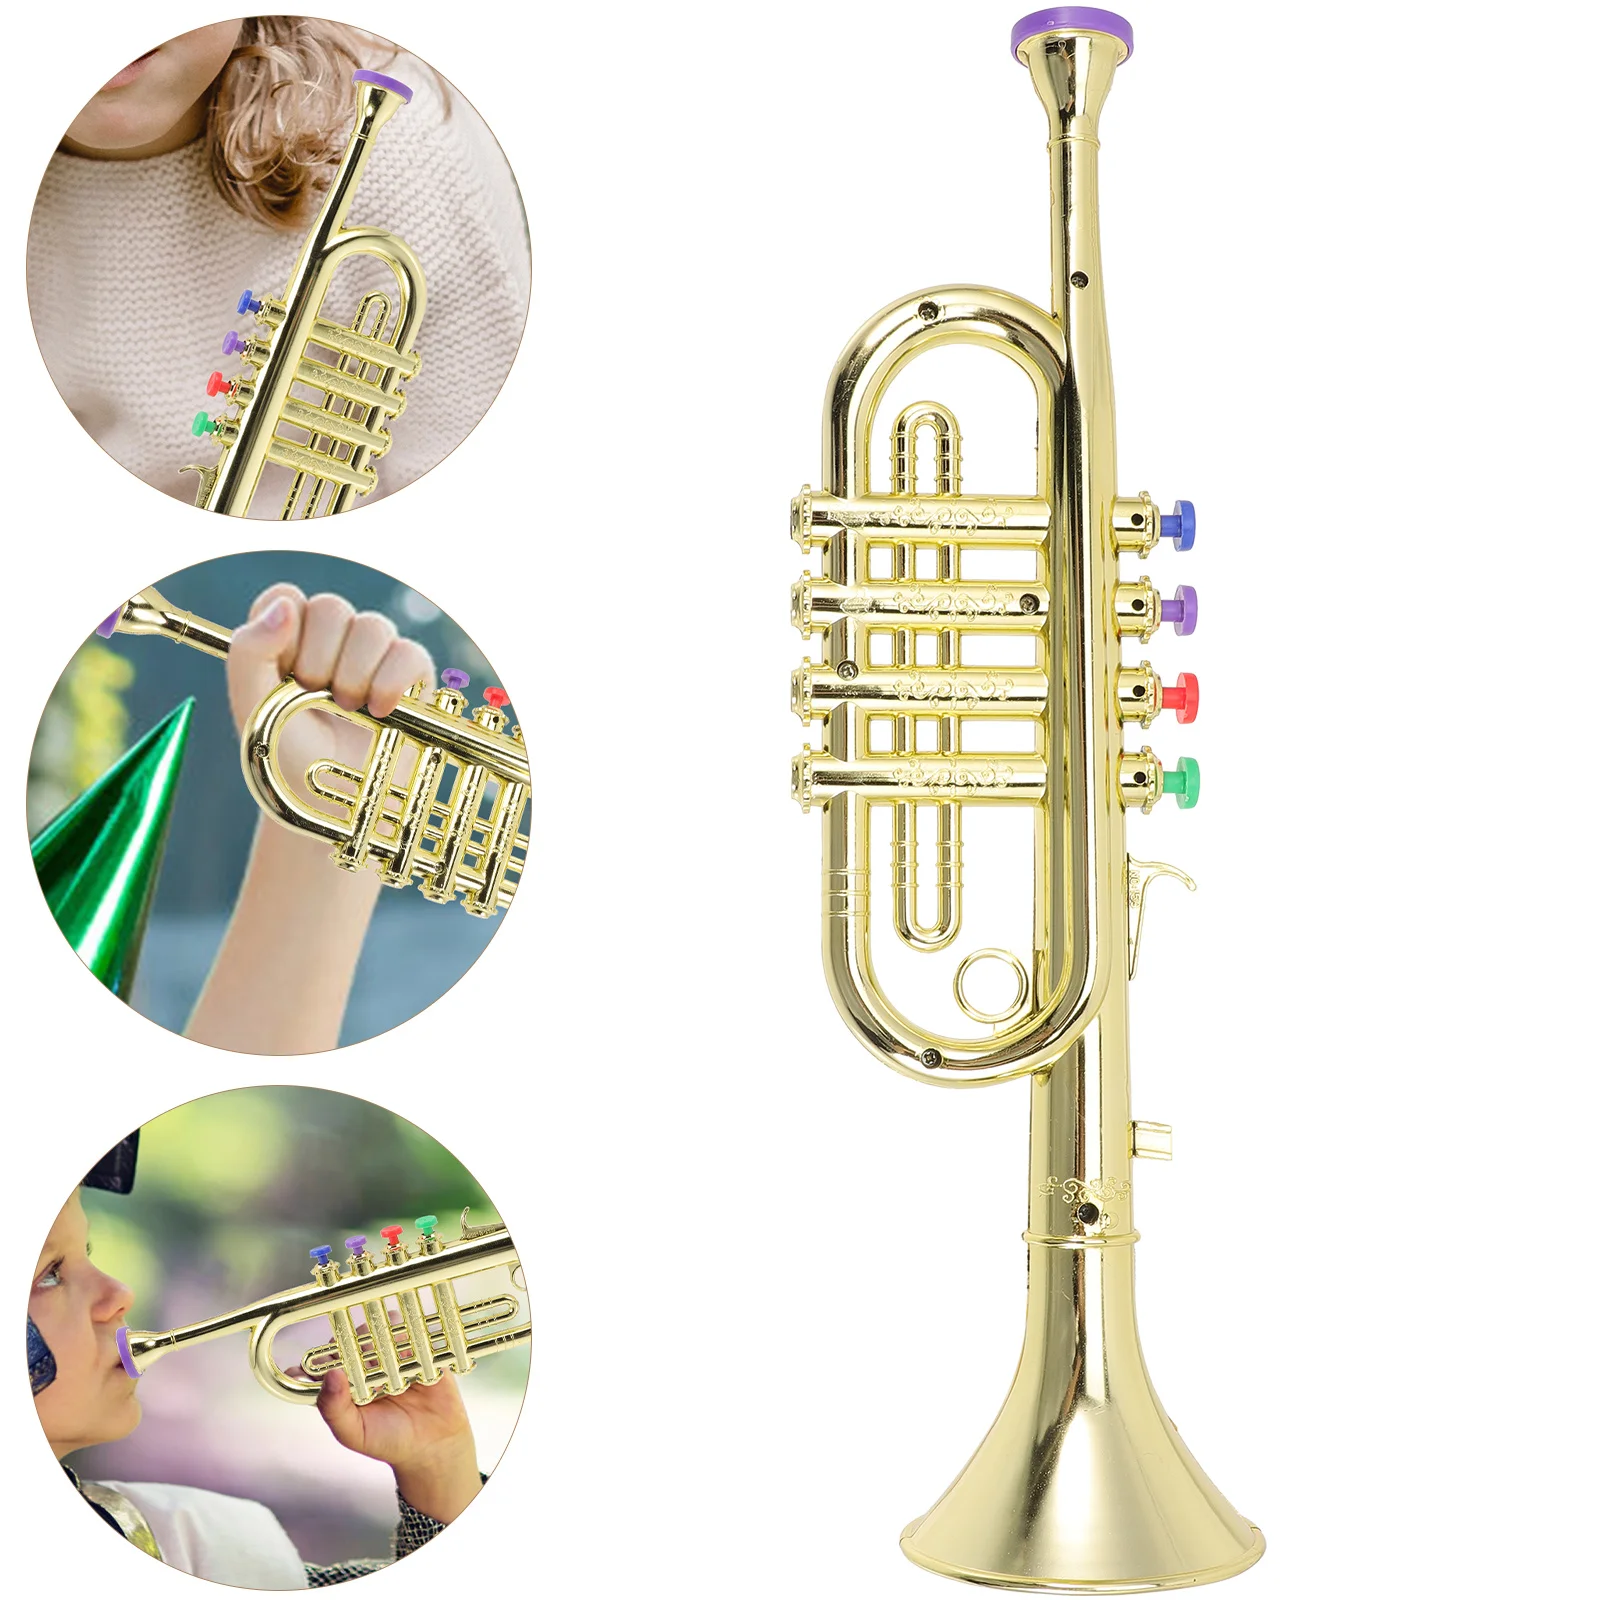 

Aldult Toy Simulated Instruments Children Trumpet Educational Plaything Creative Musical Simulation Villain